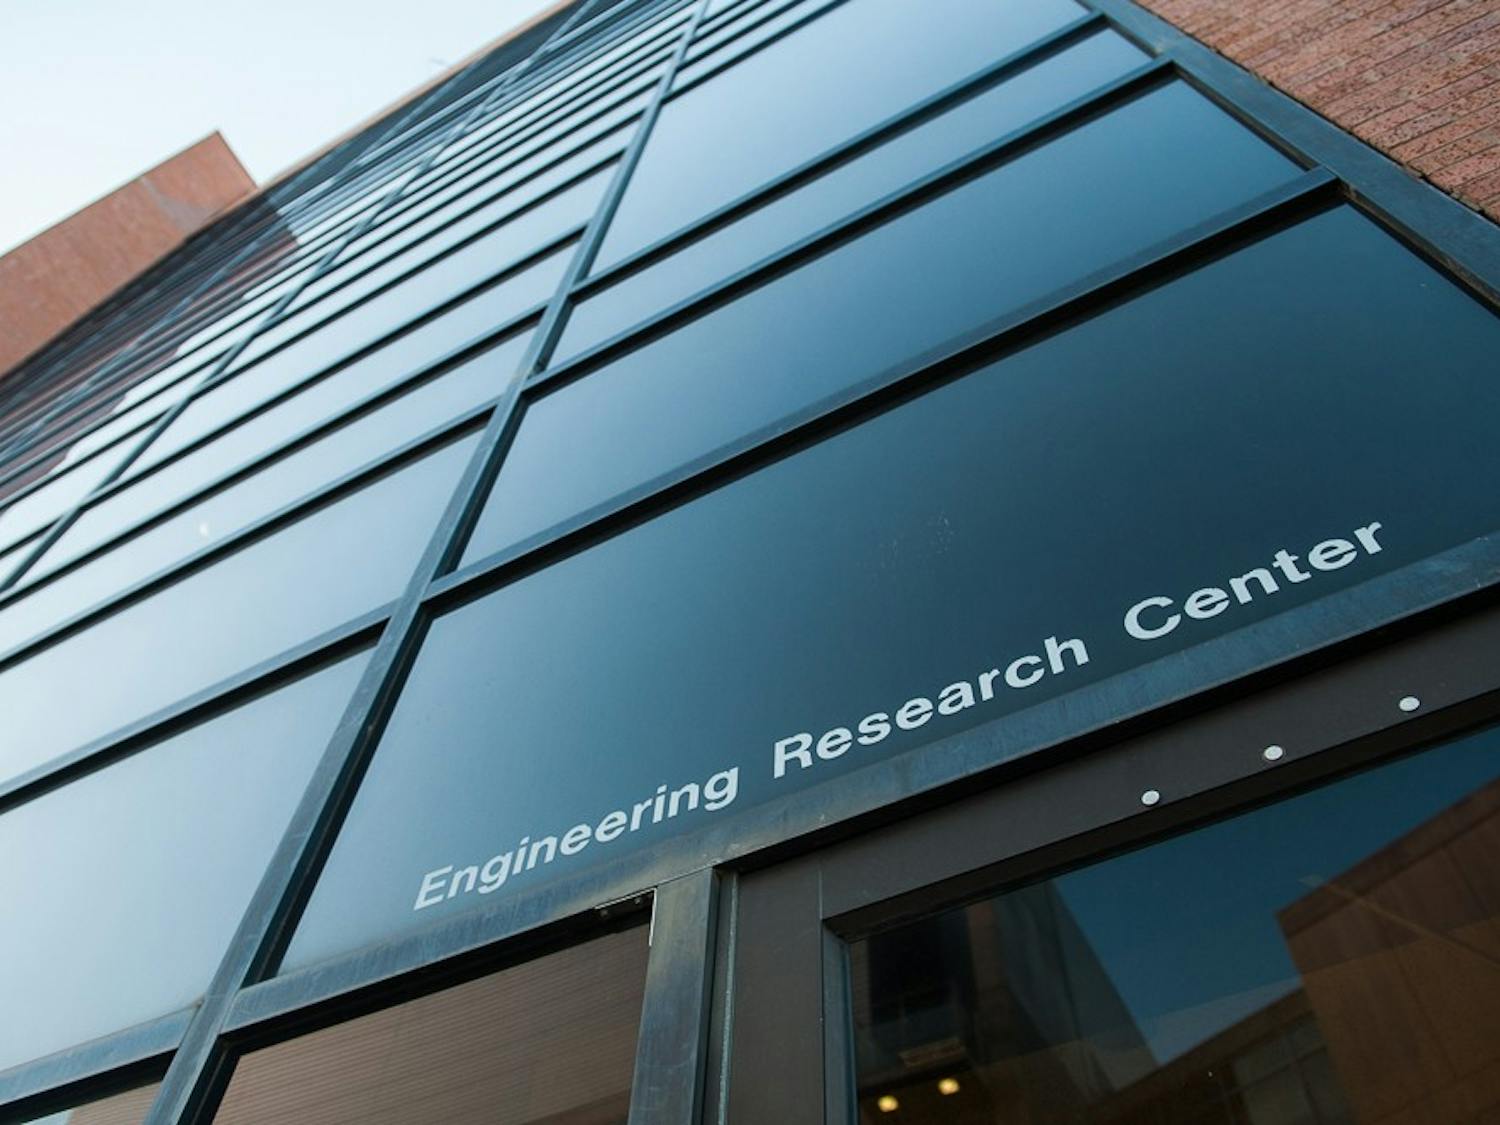 Engineering Research Center